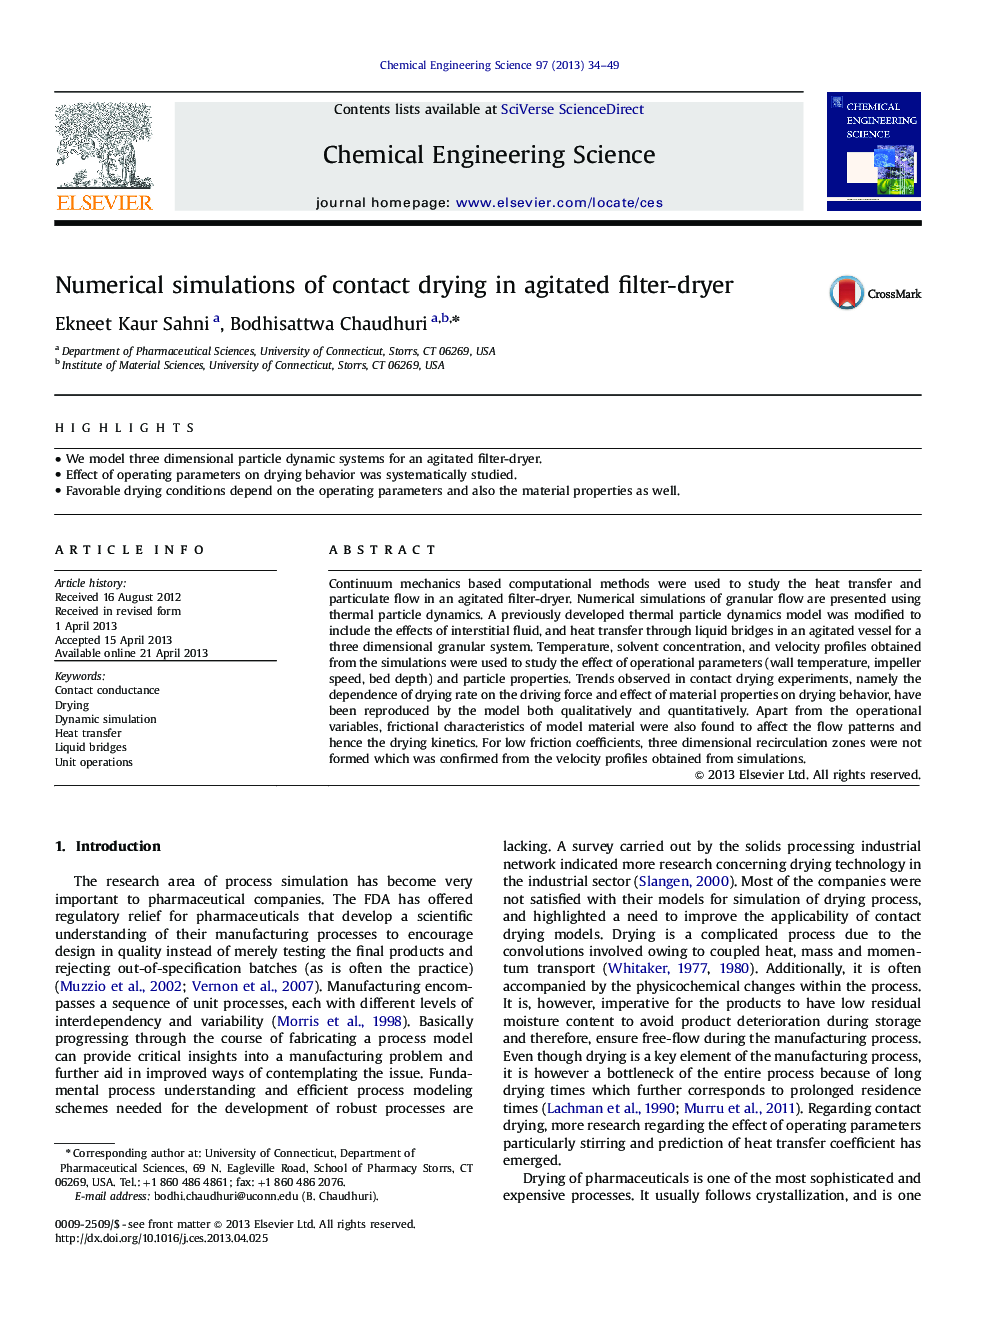 Numerical simulations of contact drying in agitated filter-dryer